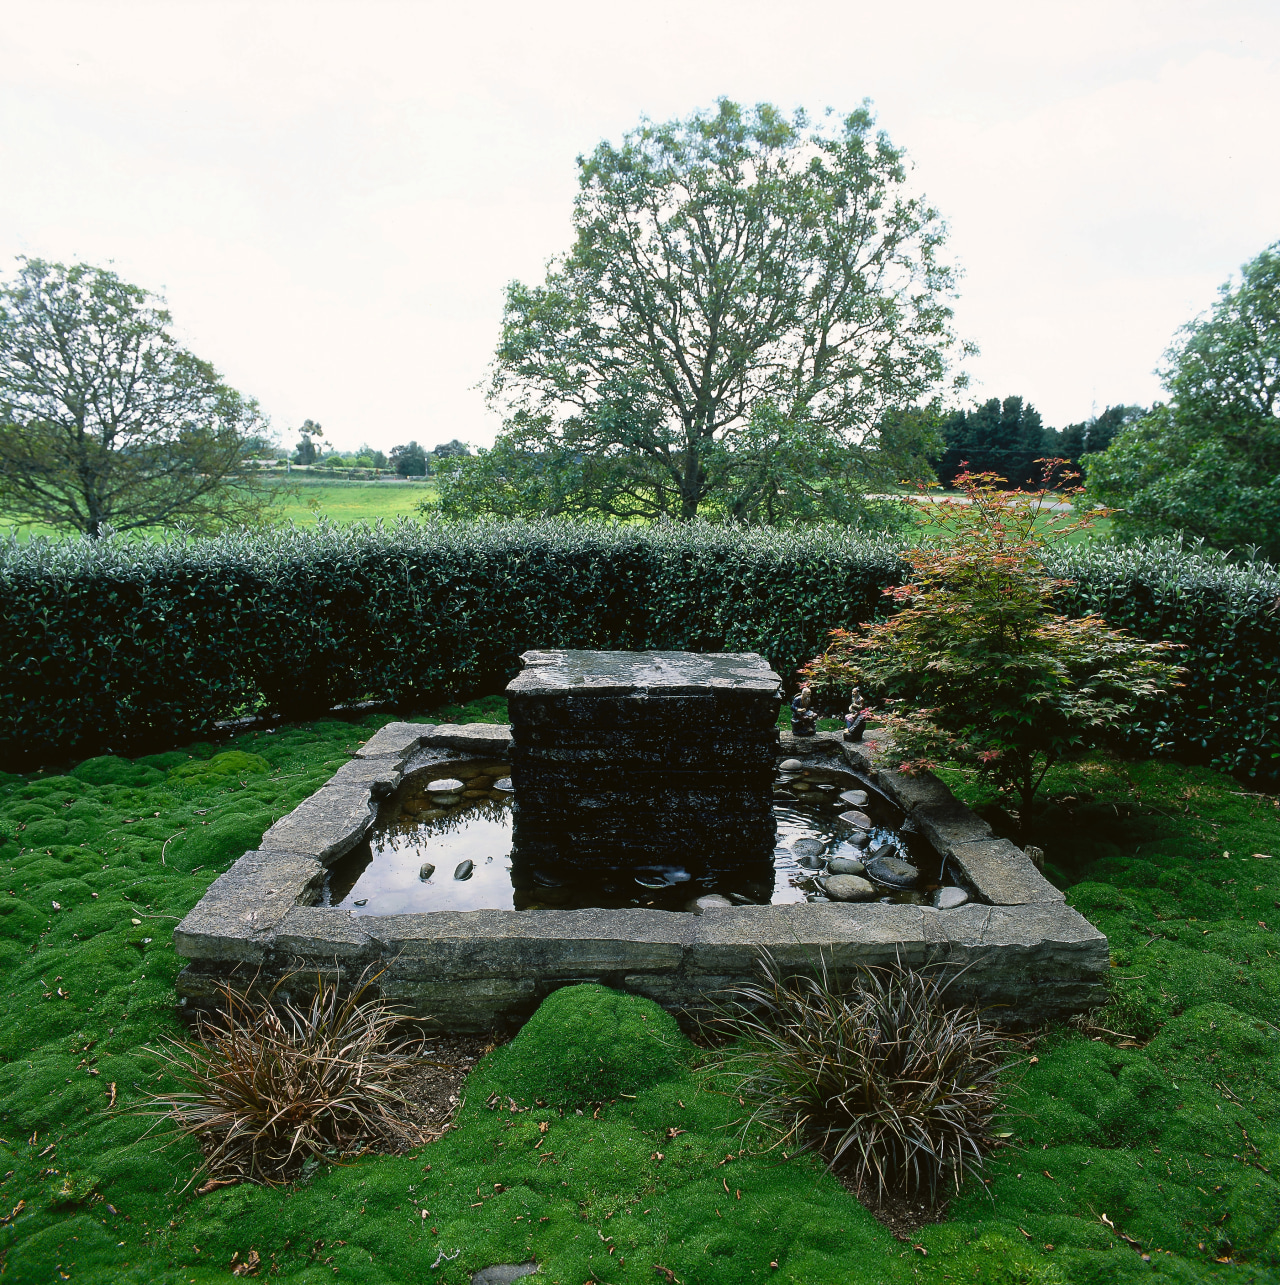 a pool water feature in this garden are garden, grass, landscape, plant, tree, yard, white, green